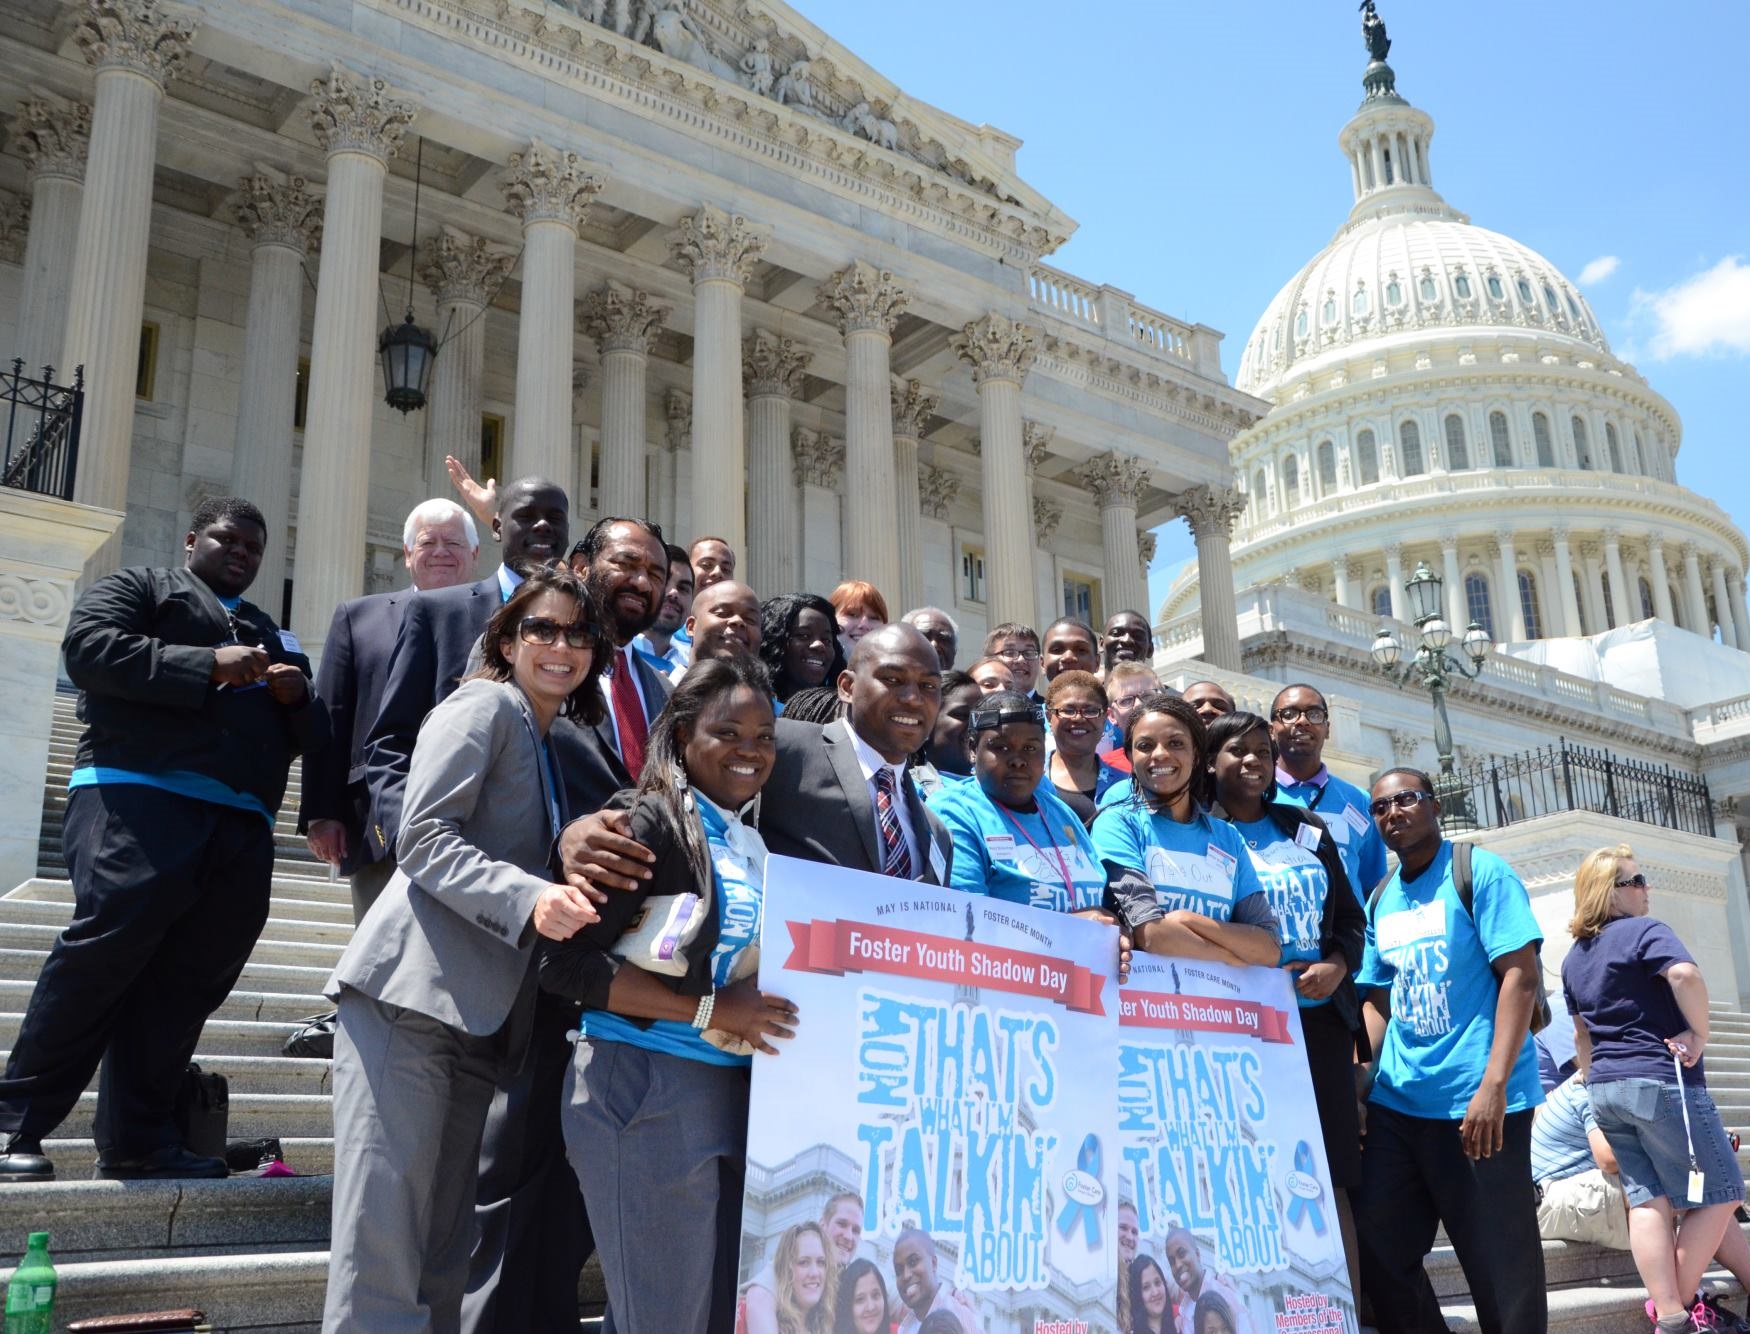 Former foster youth stand with Congressmember Bass and members of Congress on the first Foster Youth Shadow Day